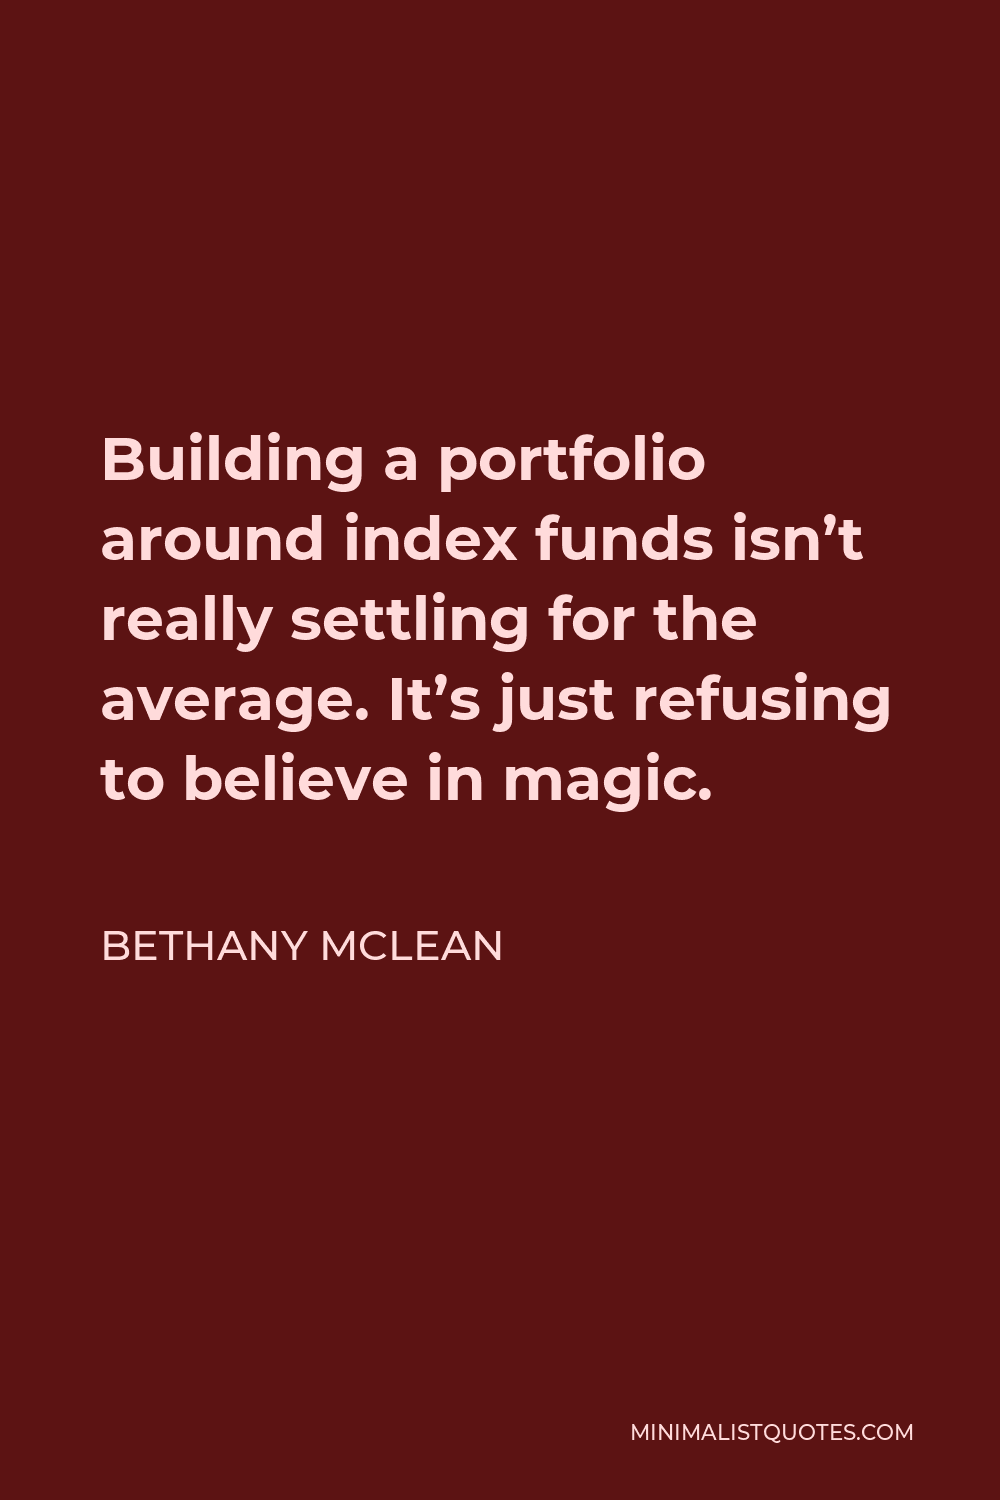 Bethany McLean Quote - Building a portfolio around index funds isn’t really settling for the average. It’s just refusing to believe in magic.